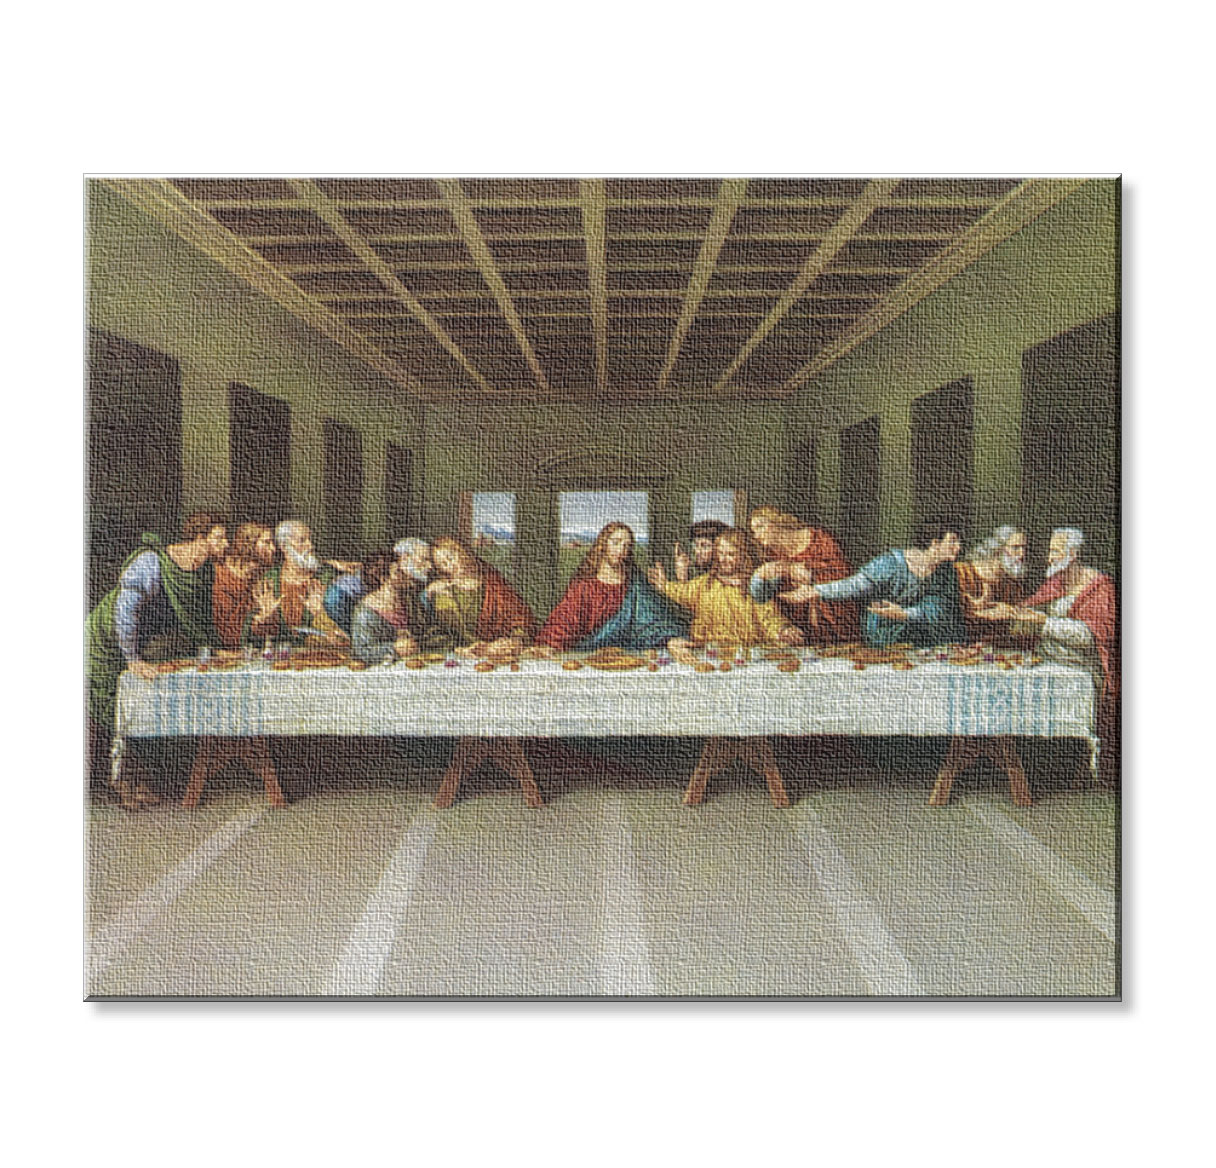 Print Last Supper 8 x 10 inch Canvas